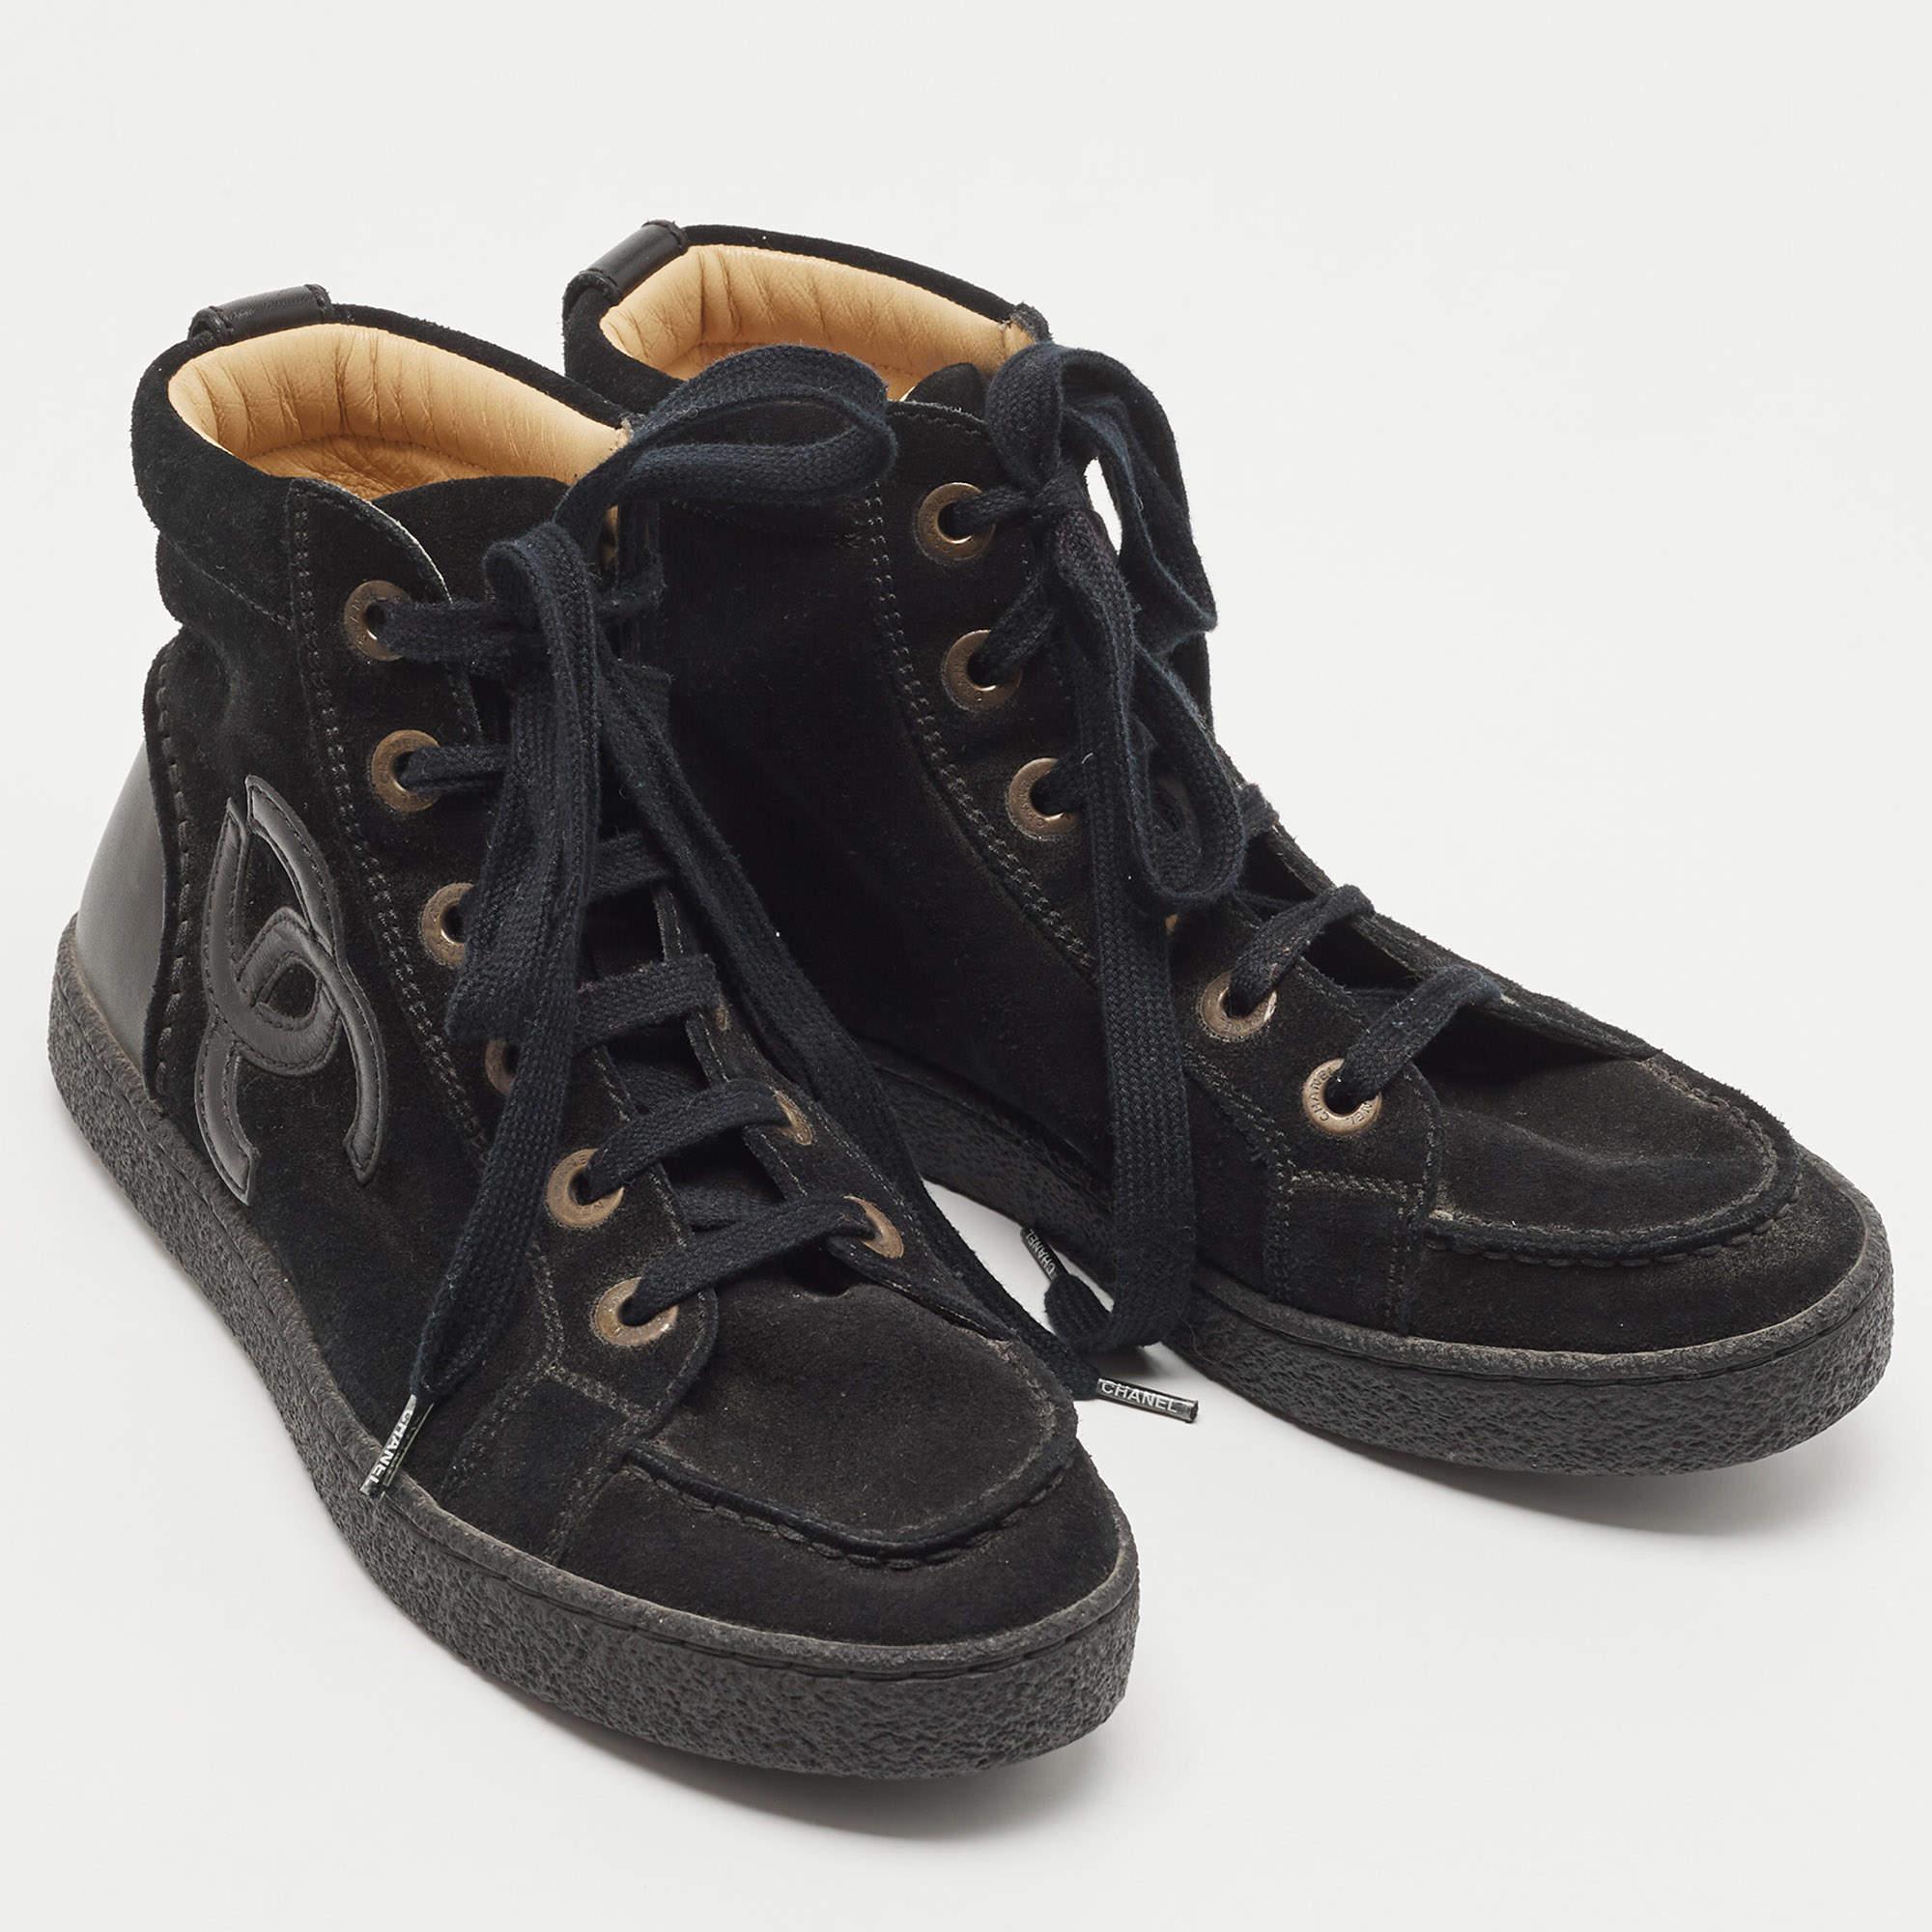 Chanel Black Leather and Suede CC High Top Sneakers Size 37 In Good Condition For Sale In Dubai, Al Qouz 2